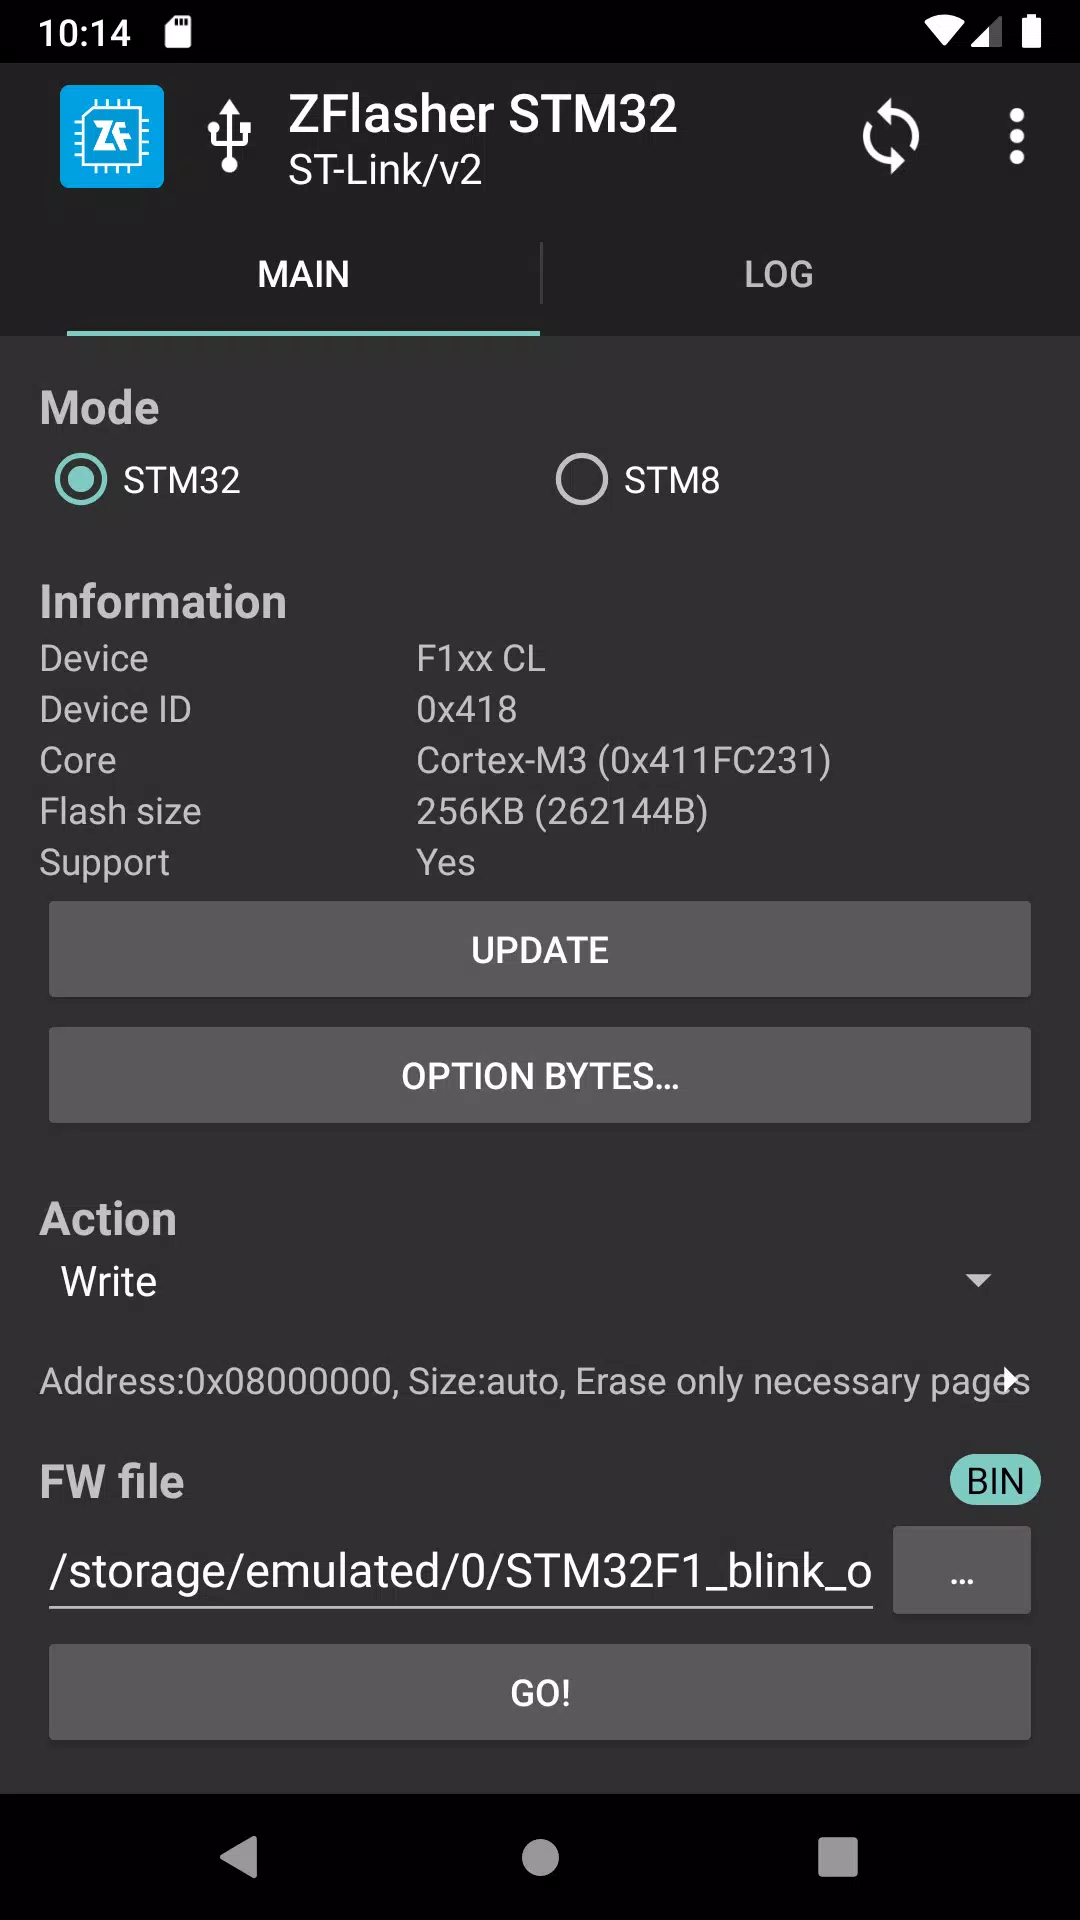 Tải Xuống Apk Zflasher Stm32 Cho Android